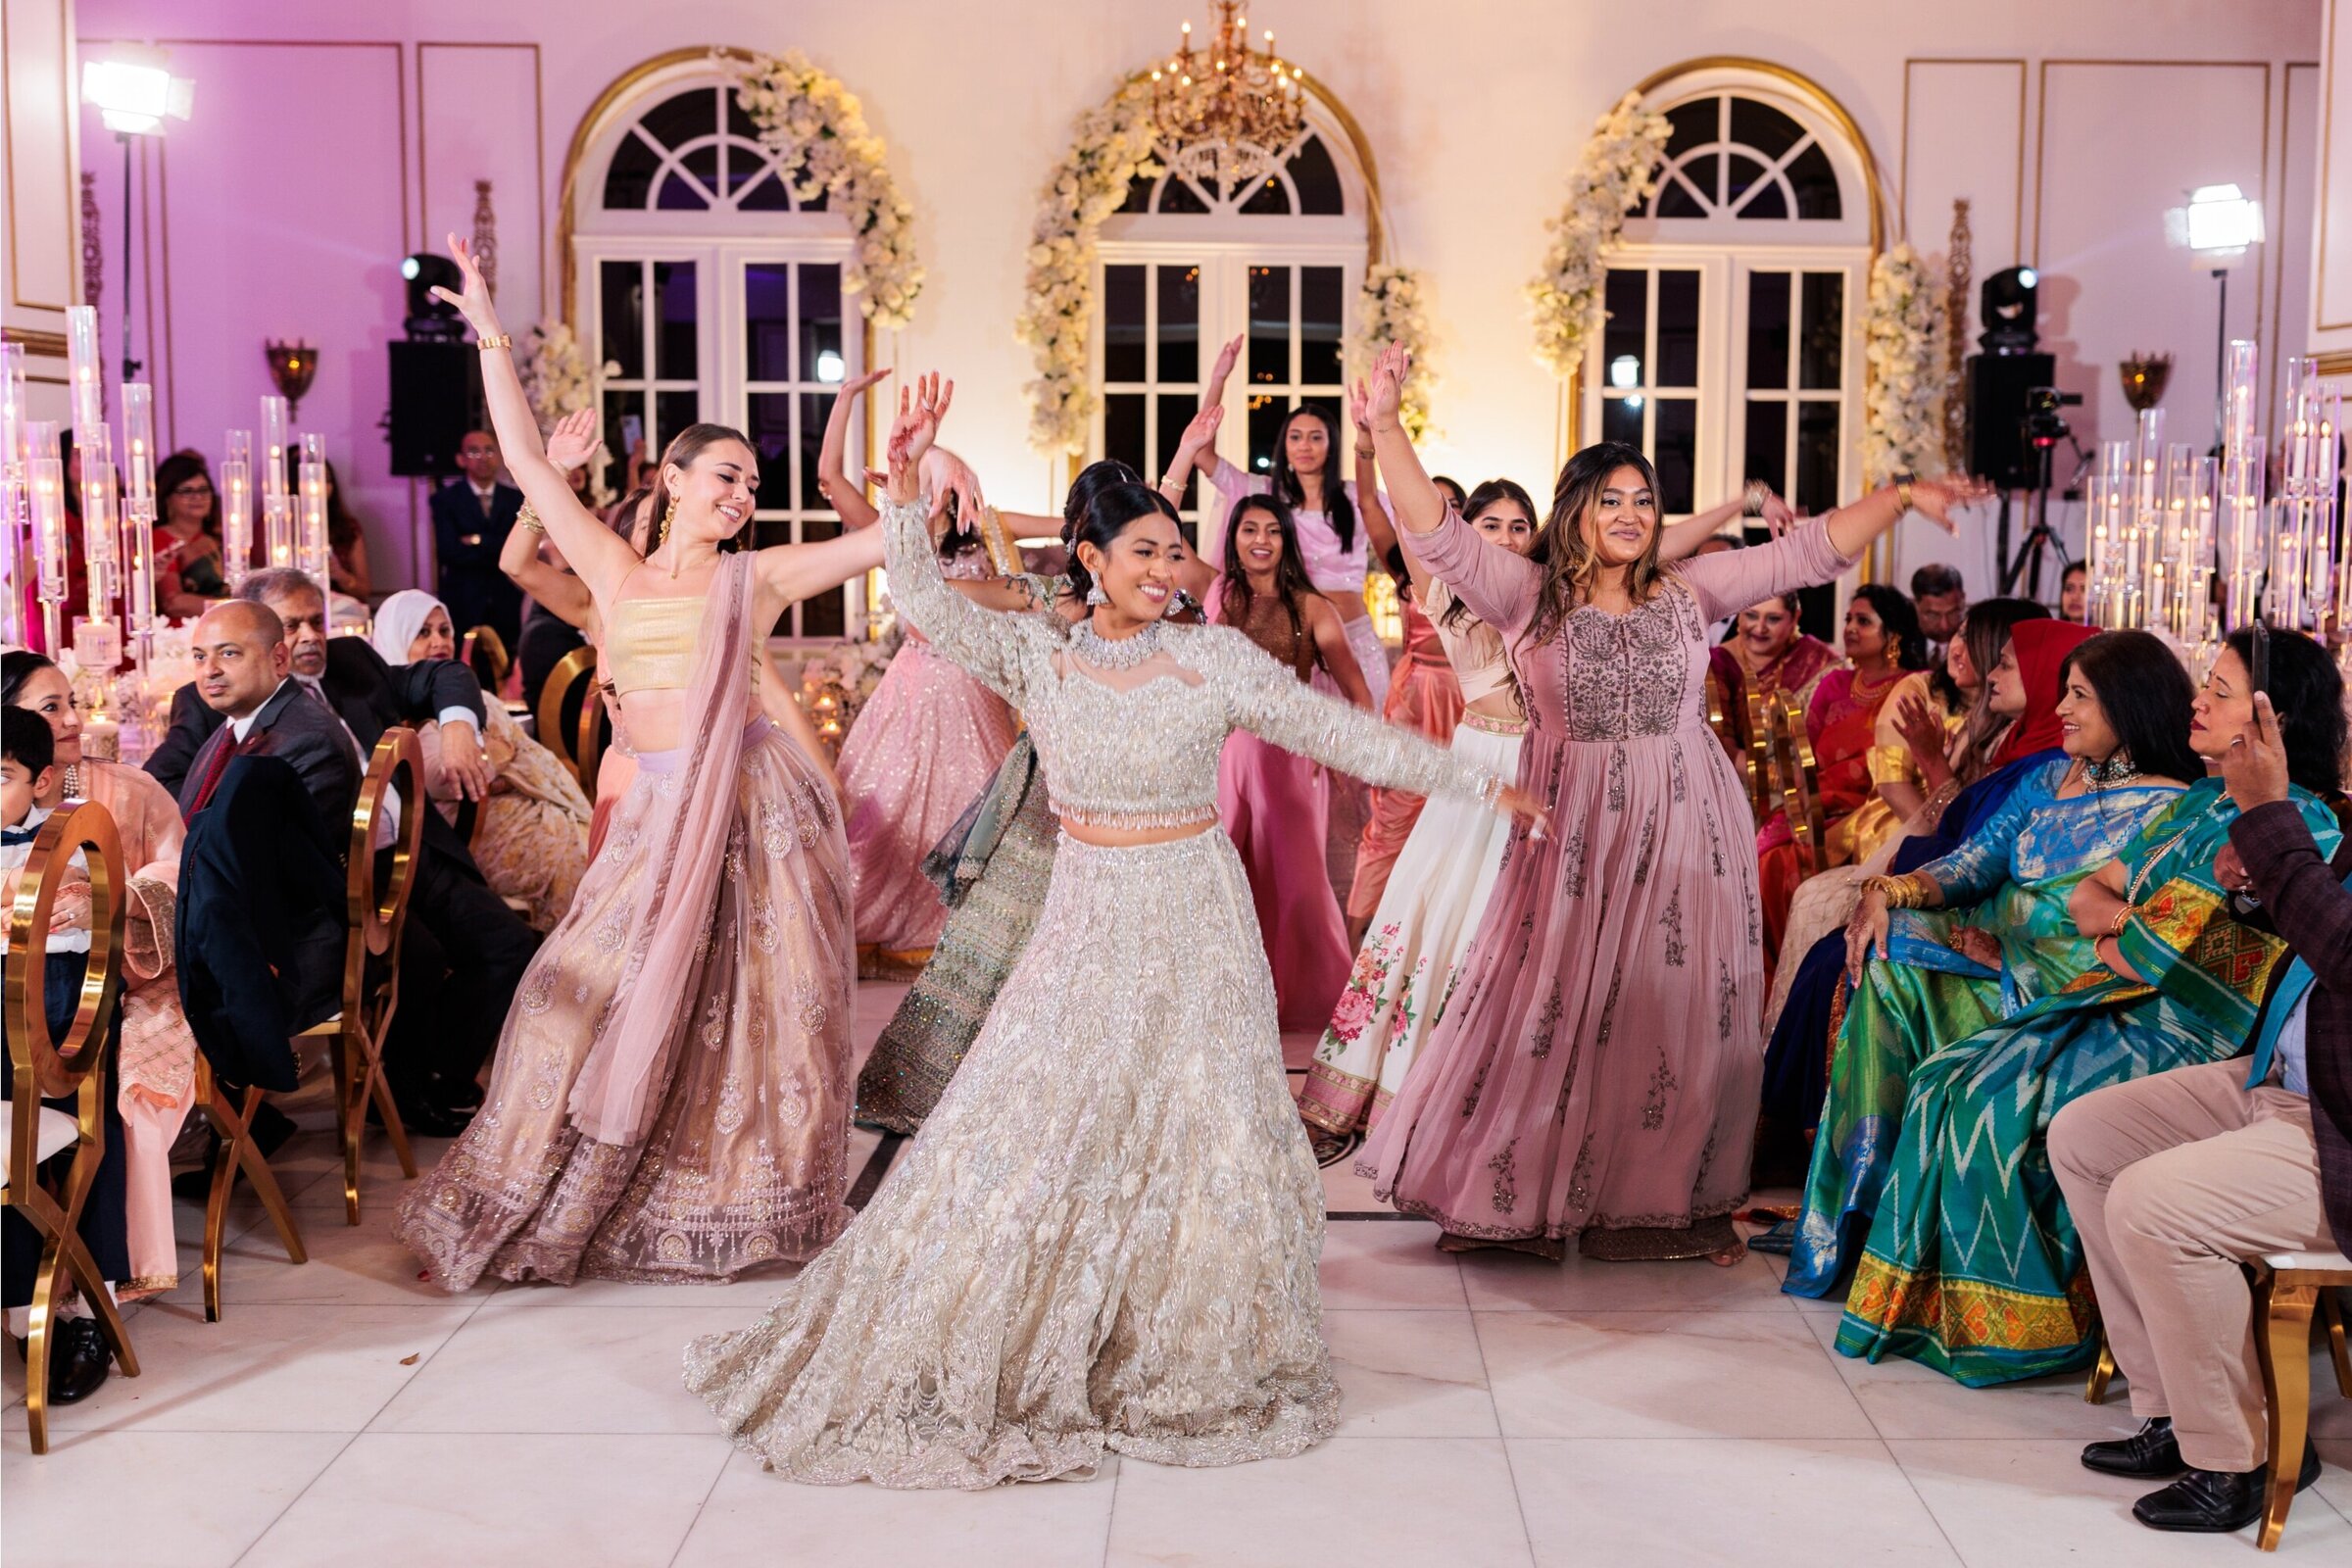 south-asian-wedding-at-chateau-nouvelle-112